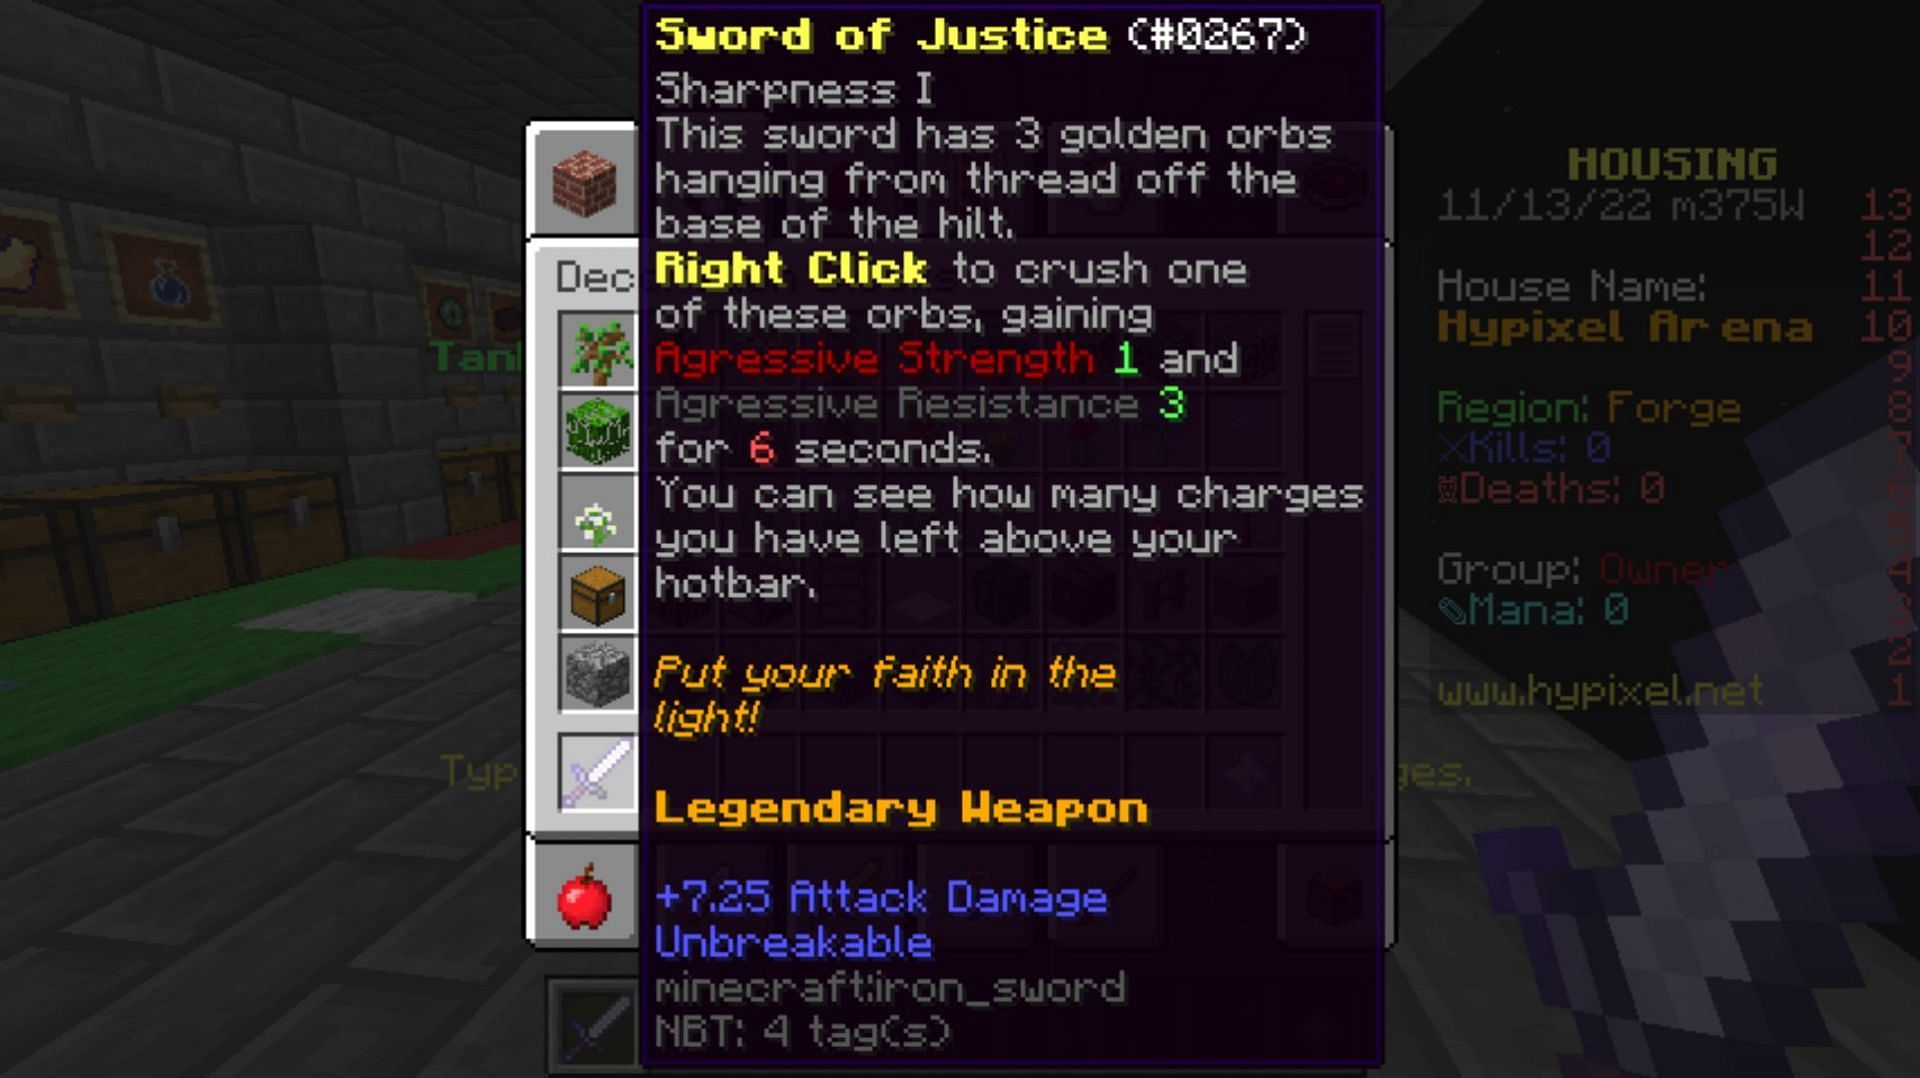 Lore can be added to any item using commands (Image via Hypixel Forums)